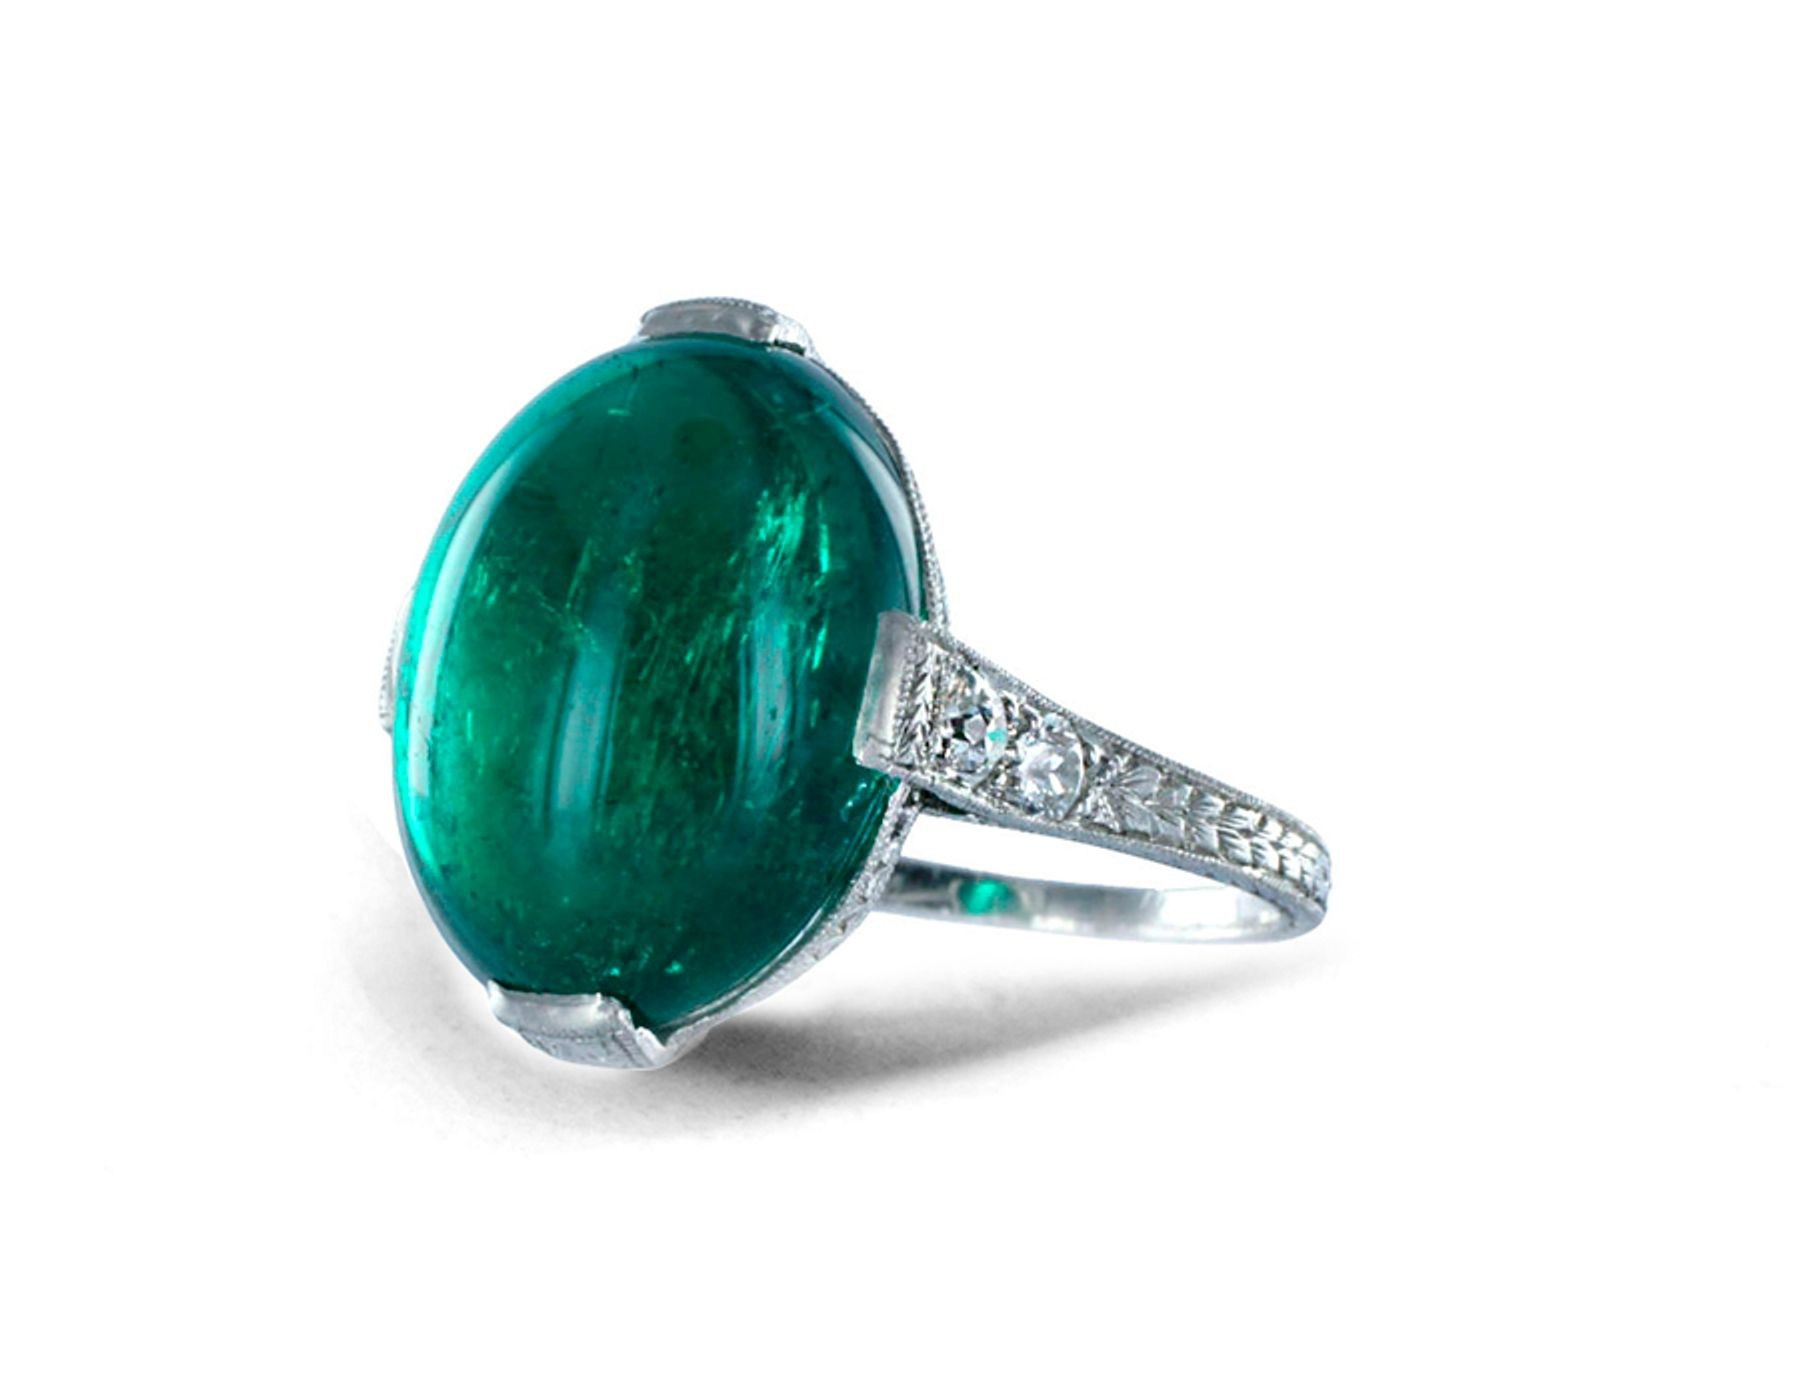 Goldsmith Special Design Victorian Green Hue Crystal Saturated "Vibrant" Emerald Cabochon Ring